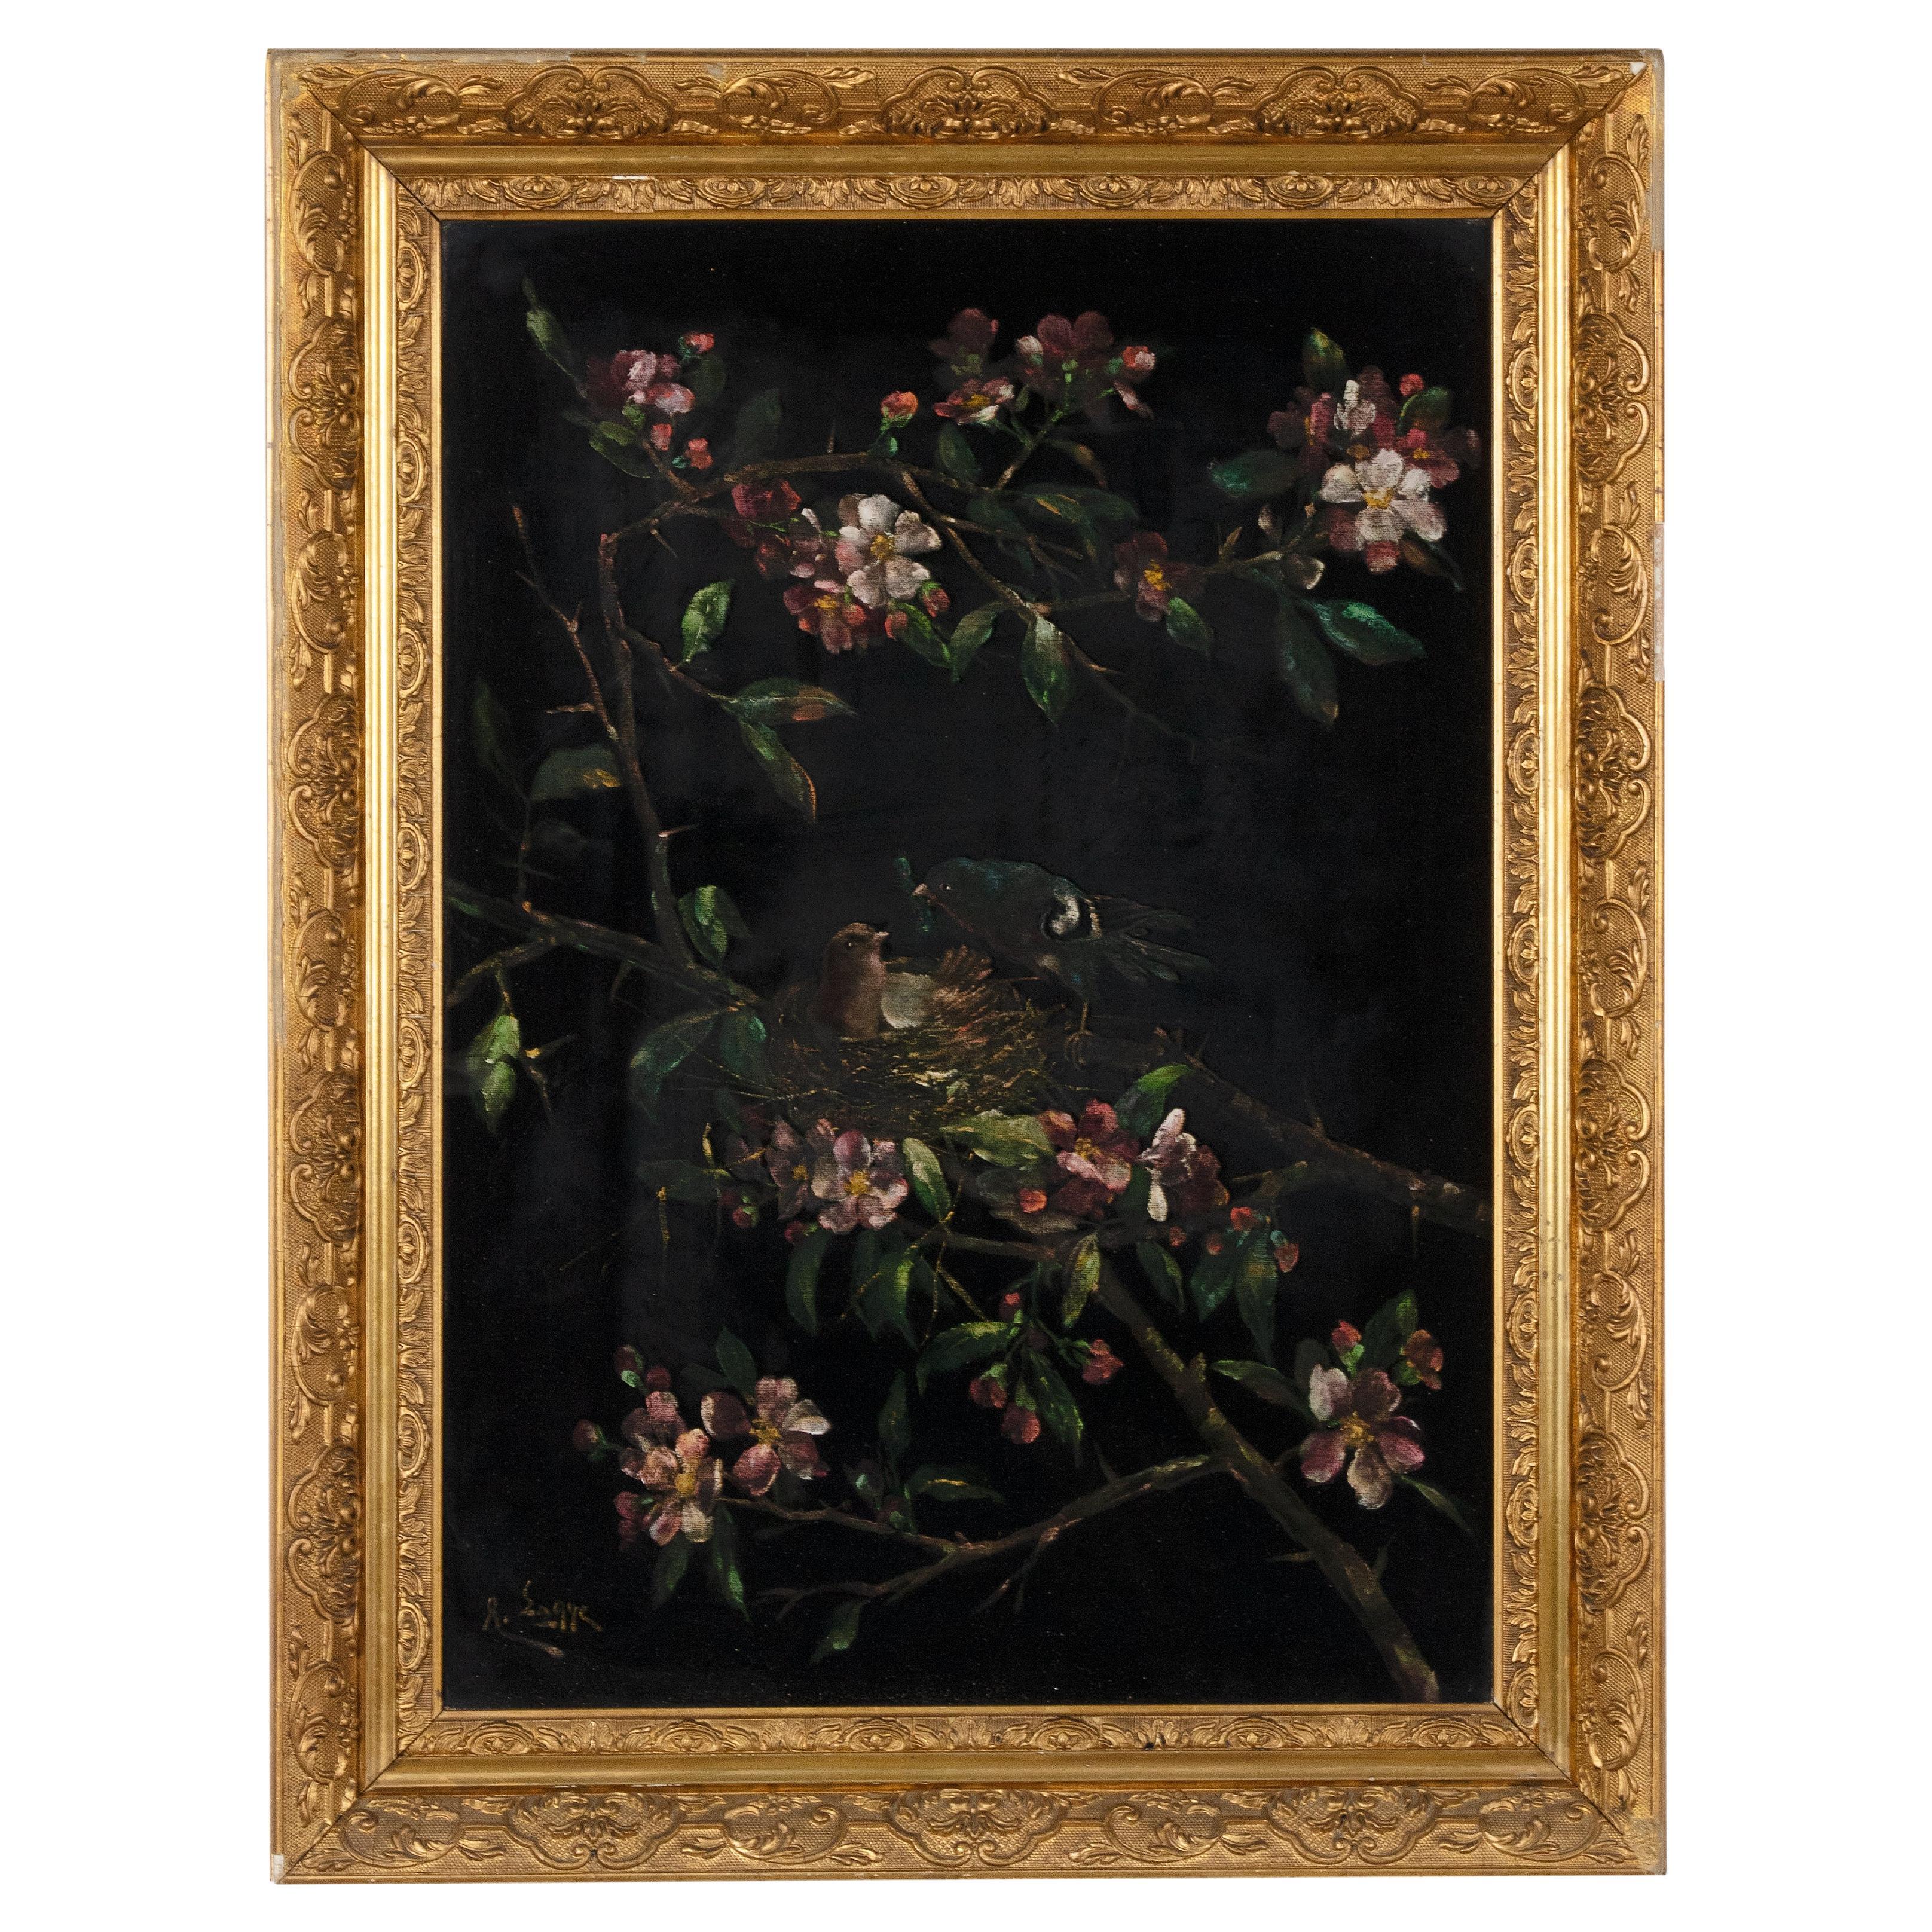 Early 20th Century Oil Painting with Birds in Blossom Tree by Raphaël Lagye